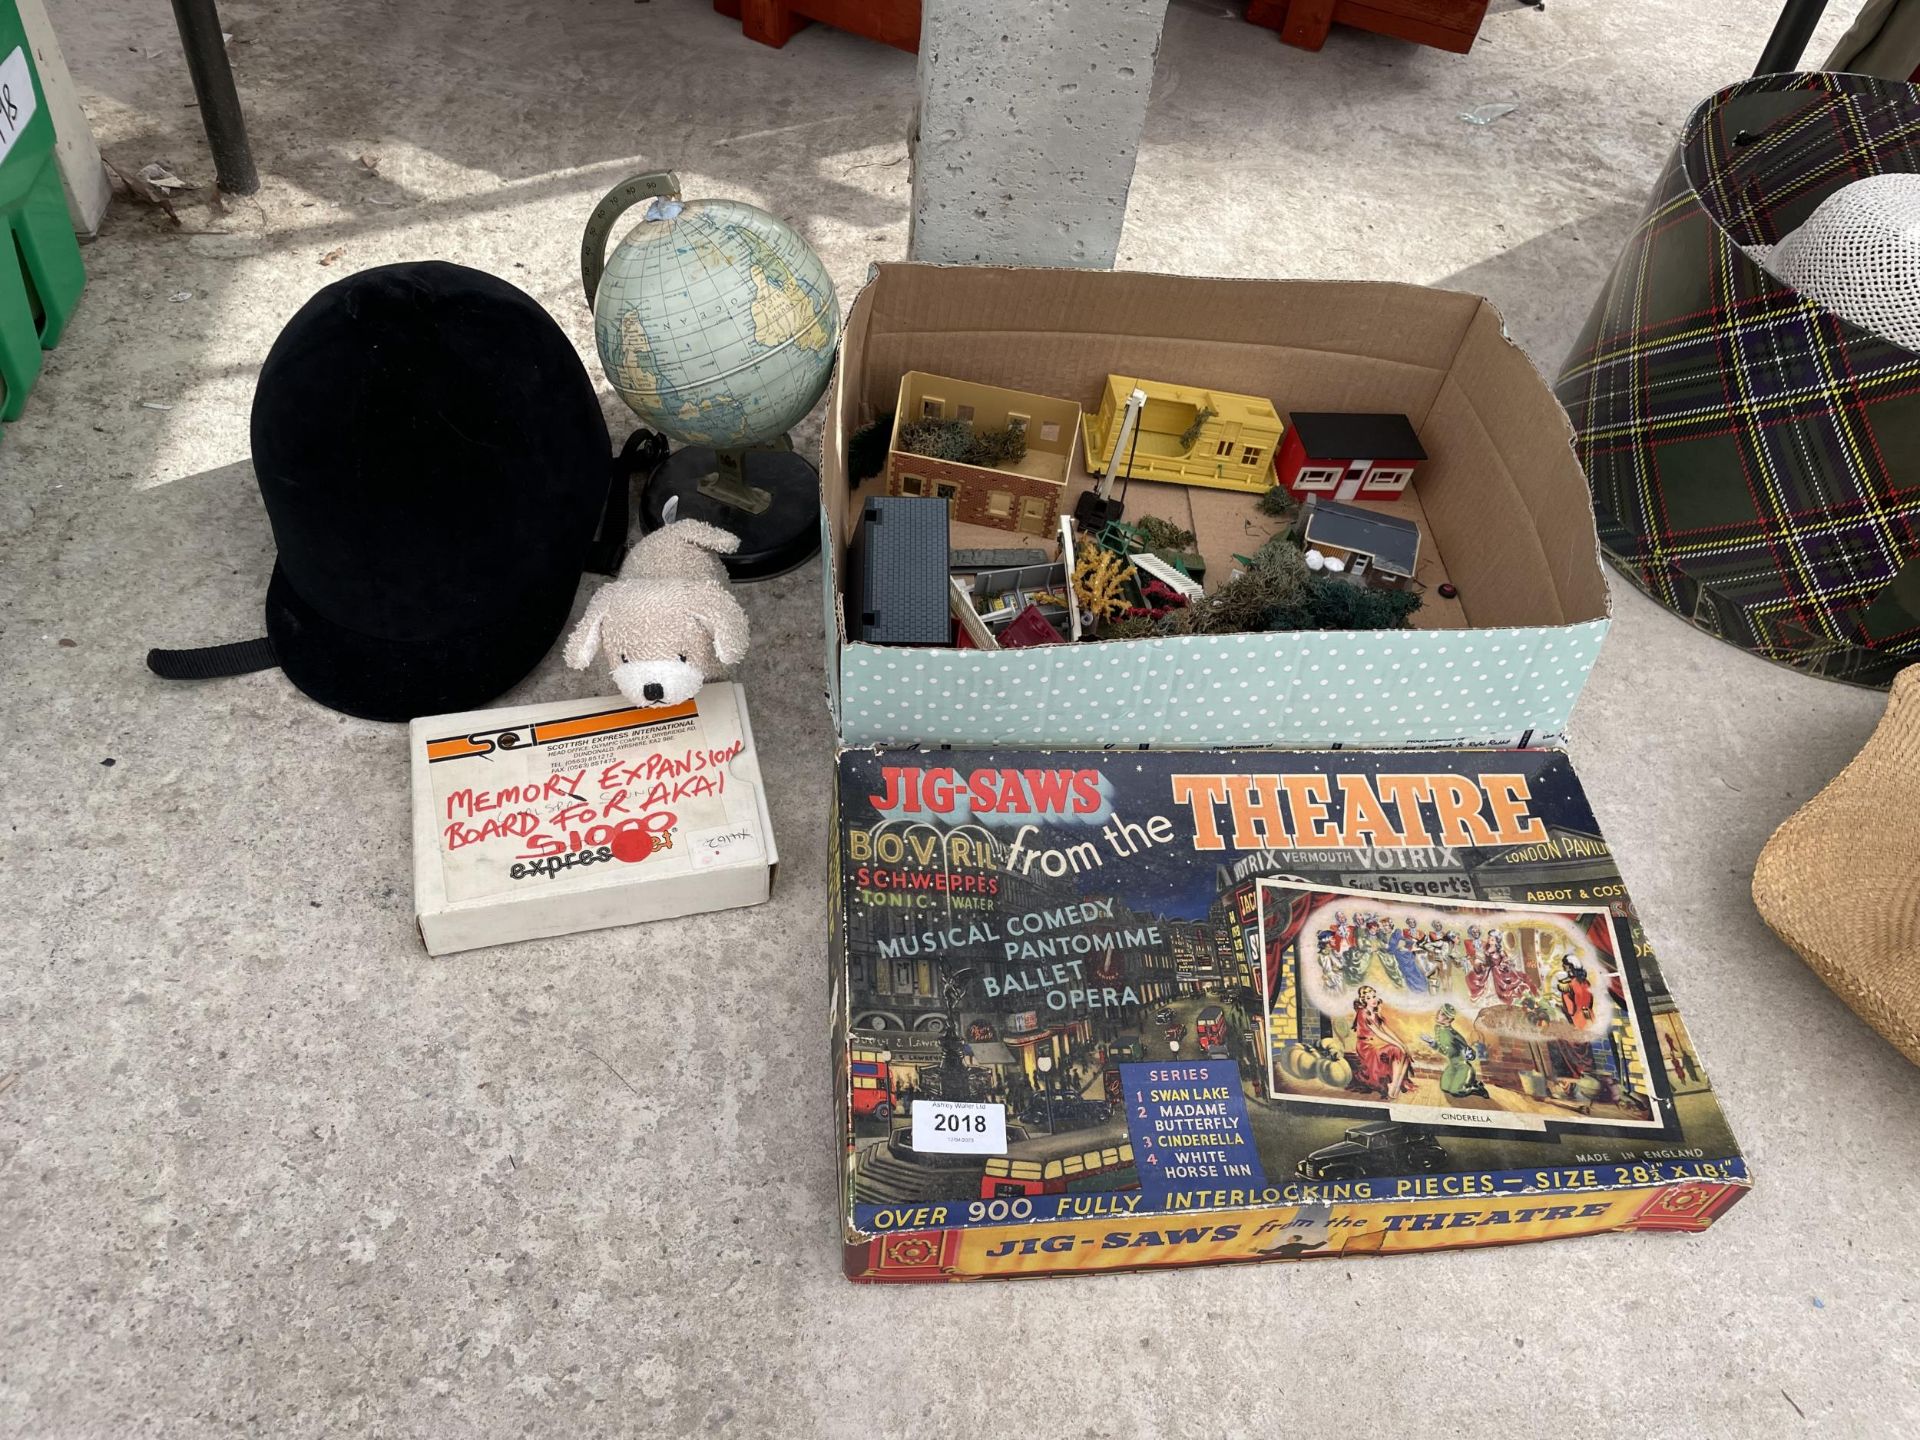 AN ASSORTMENT OF ITEMS TO INCLUDE A JIGSAW, A GLOBE AND TRAIN TRACK ITEMS ETC